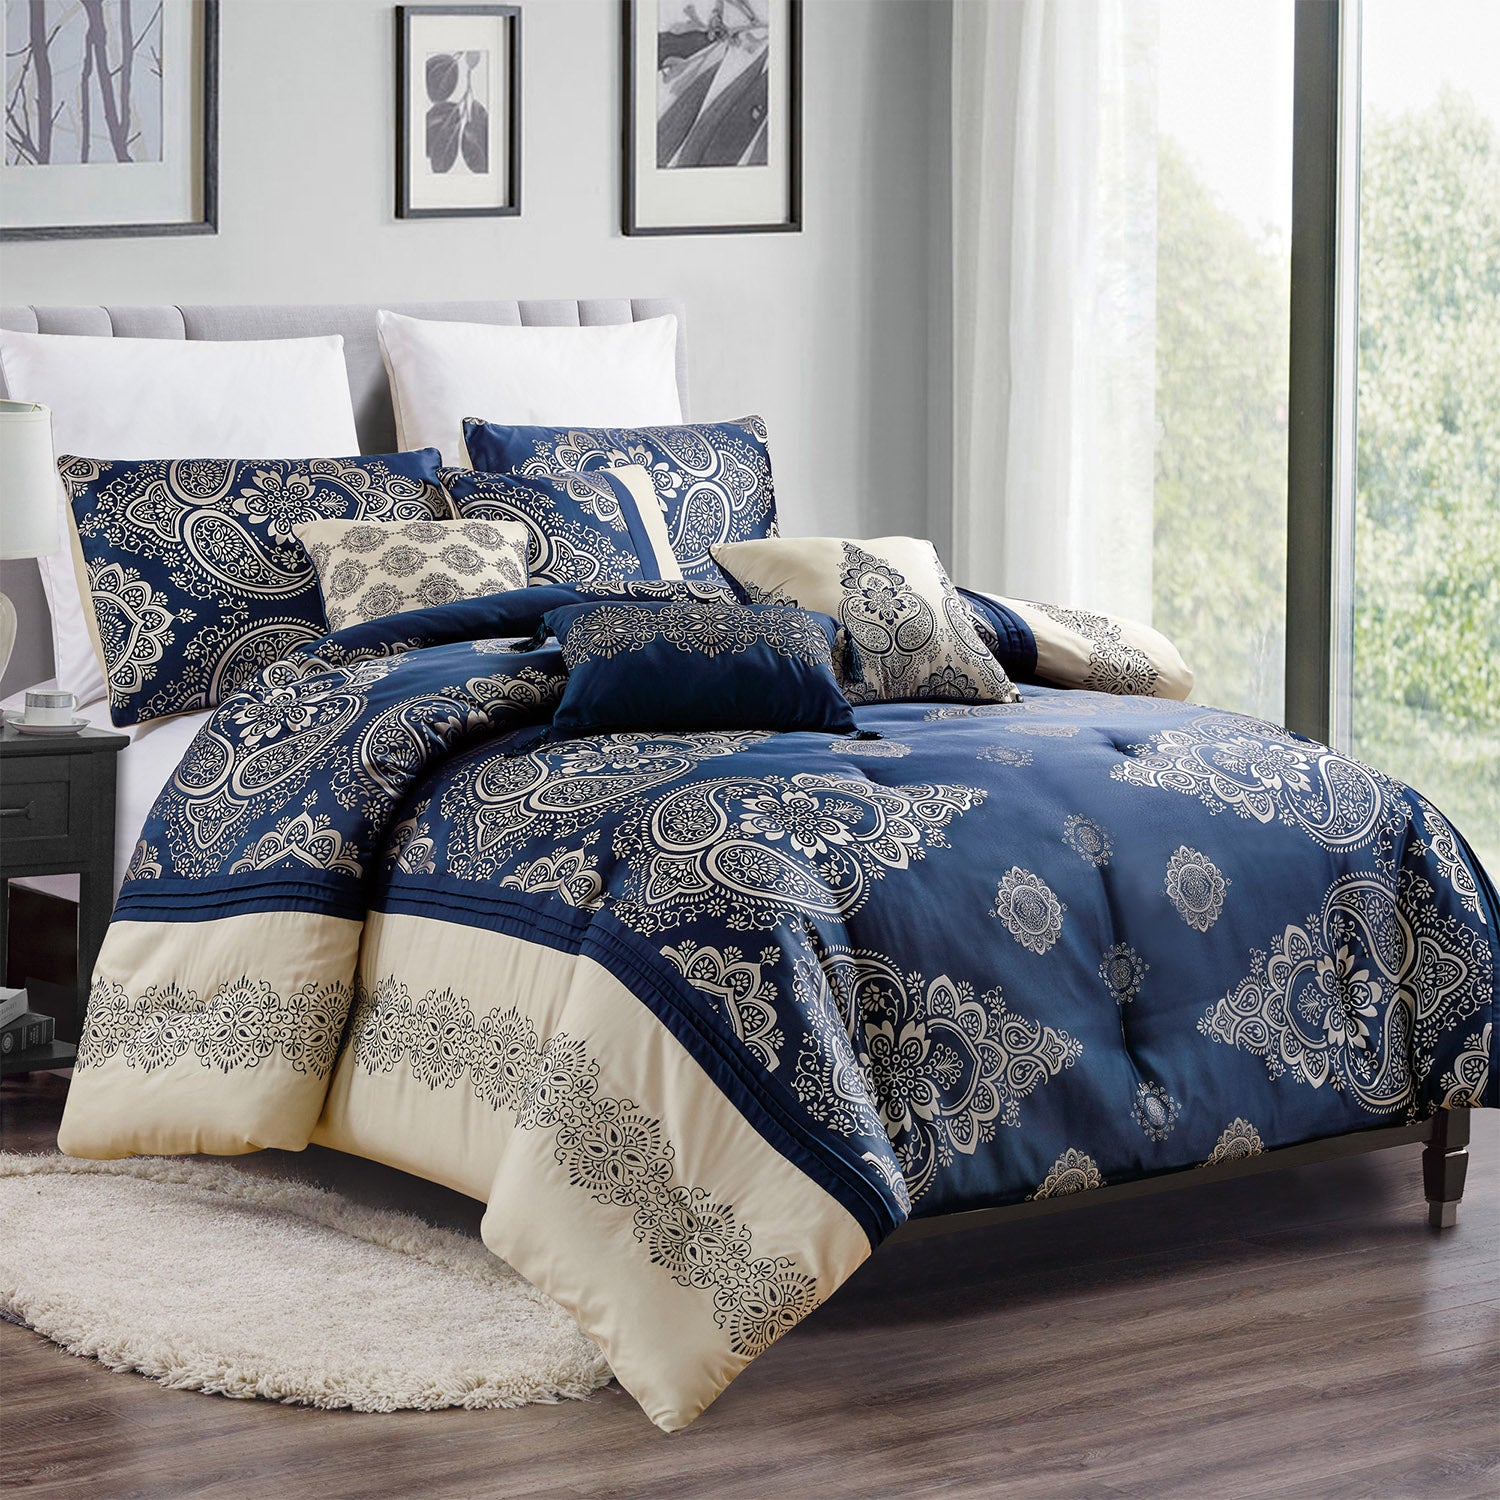 LEVANE 7PC BEDDING COMFORTER SET. RUFFLE & PATCHWORK, MICROFIBER FABRIC, FADE RESISTANT, SUPER SOFT, BED IN A BAG